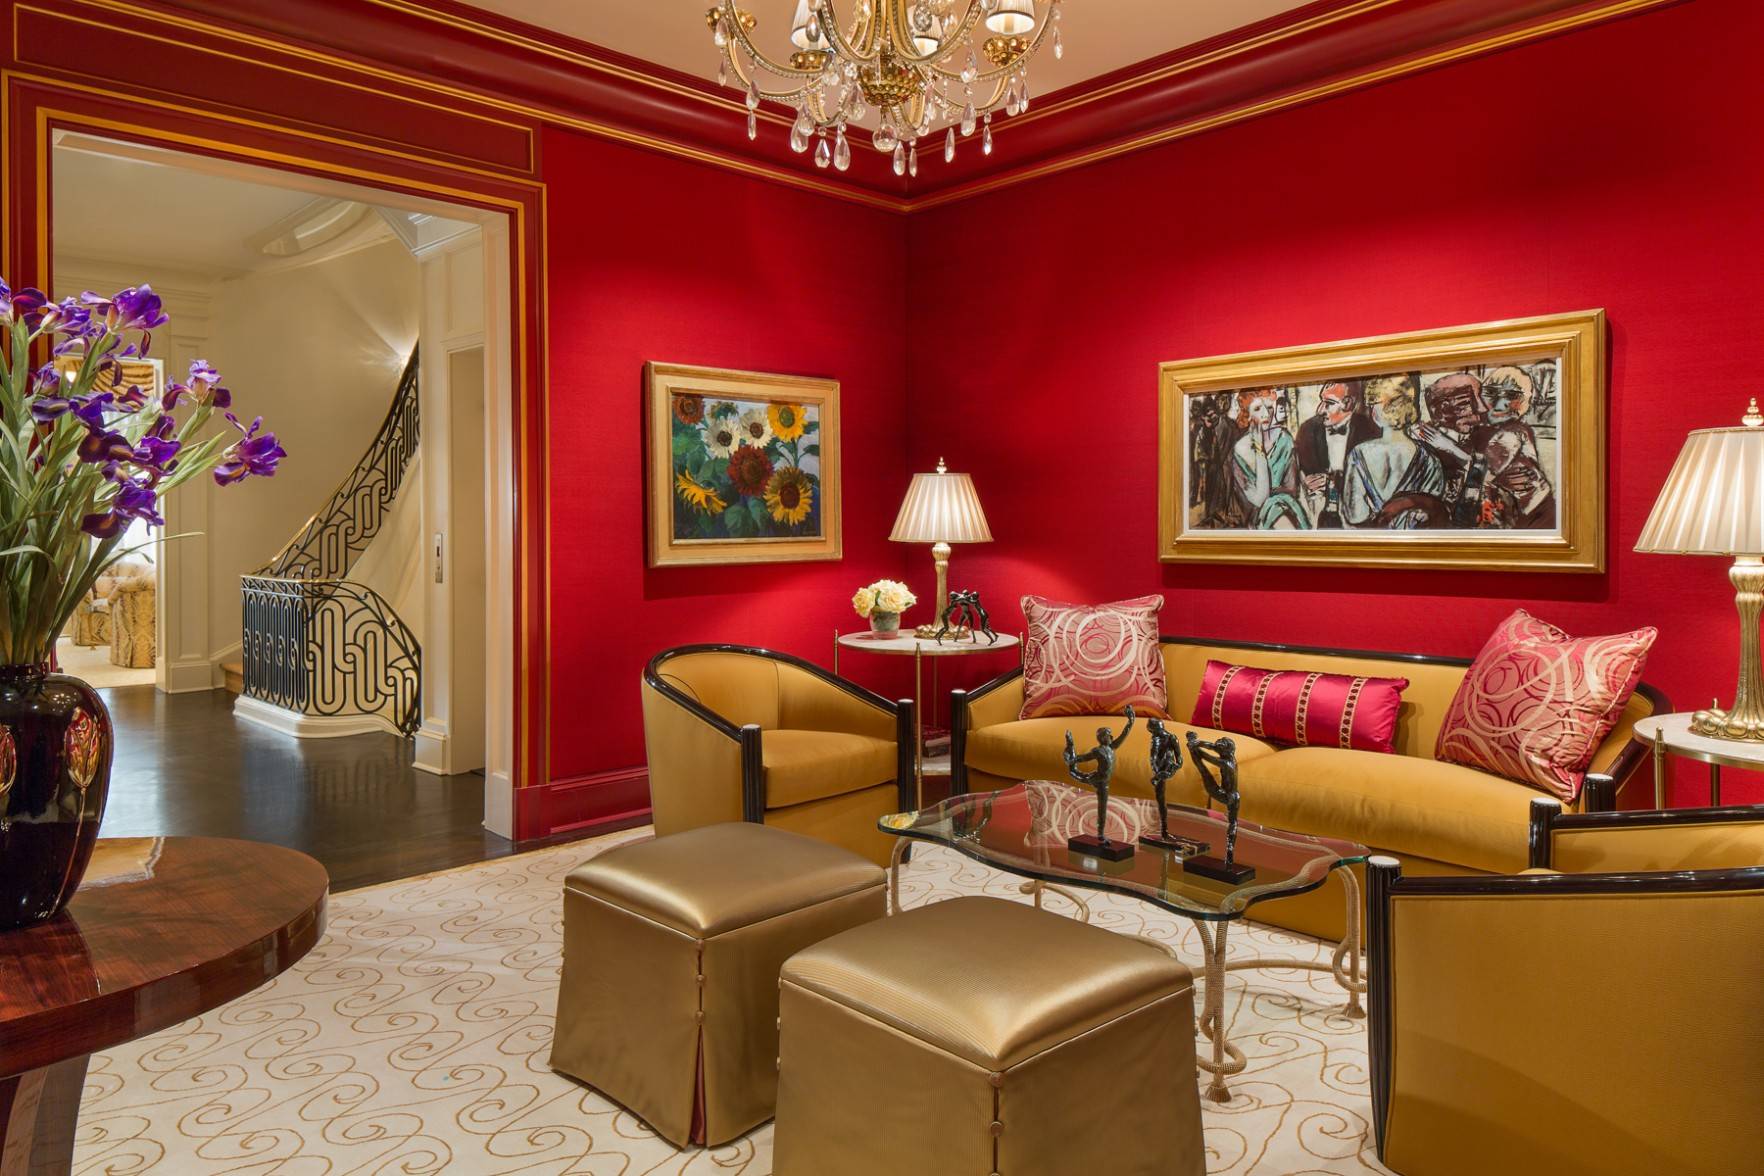 Discover unparalleled Upper East Side elegance and refinement in this pristine six story, 20 foot wide limestone mansion, just off Fifth Avenue.